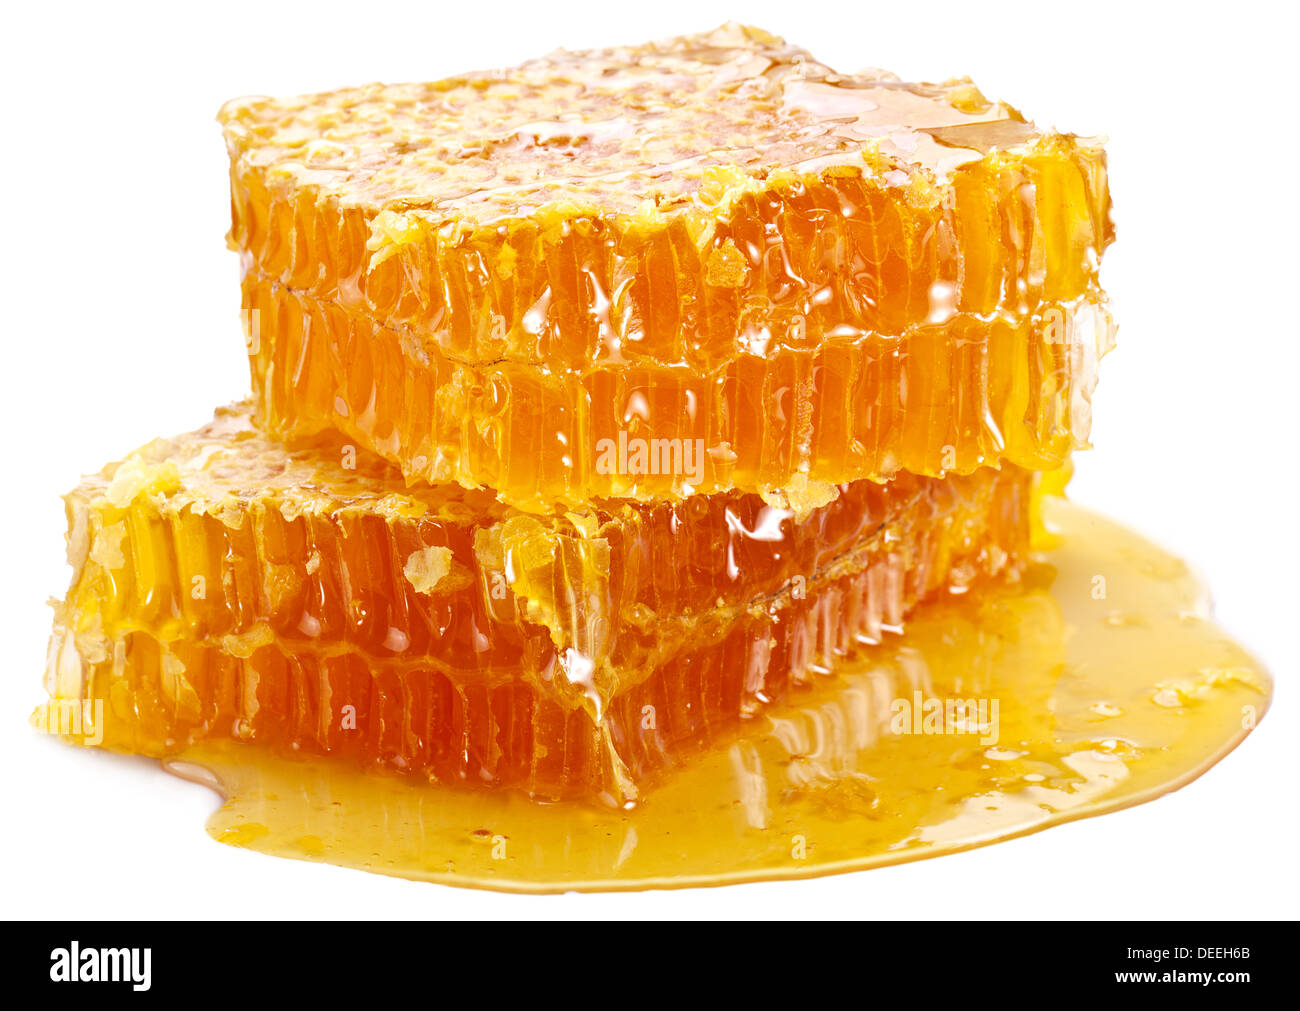 Honeycomb on a white background. Stock Photo